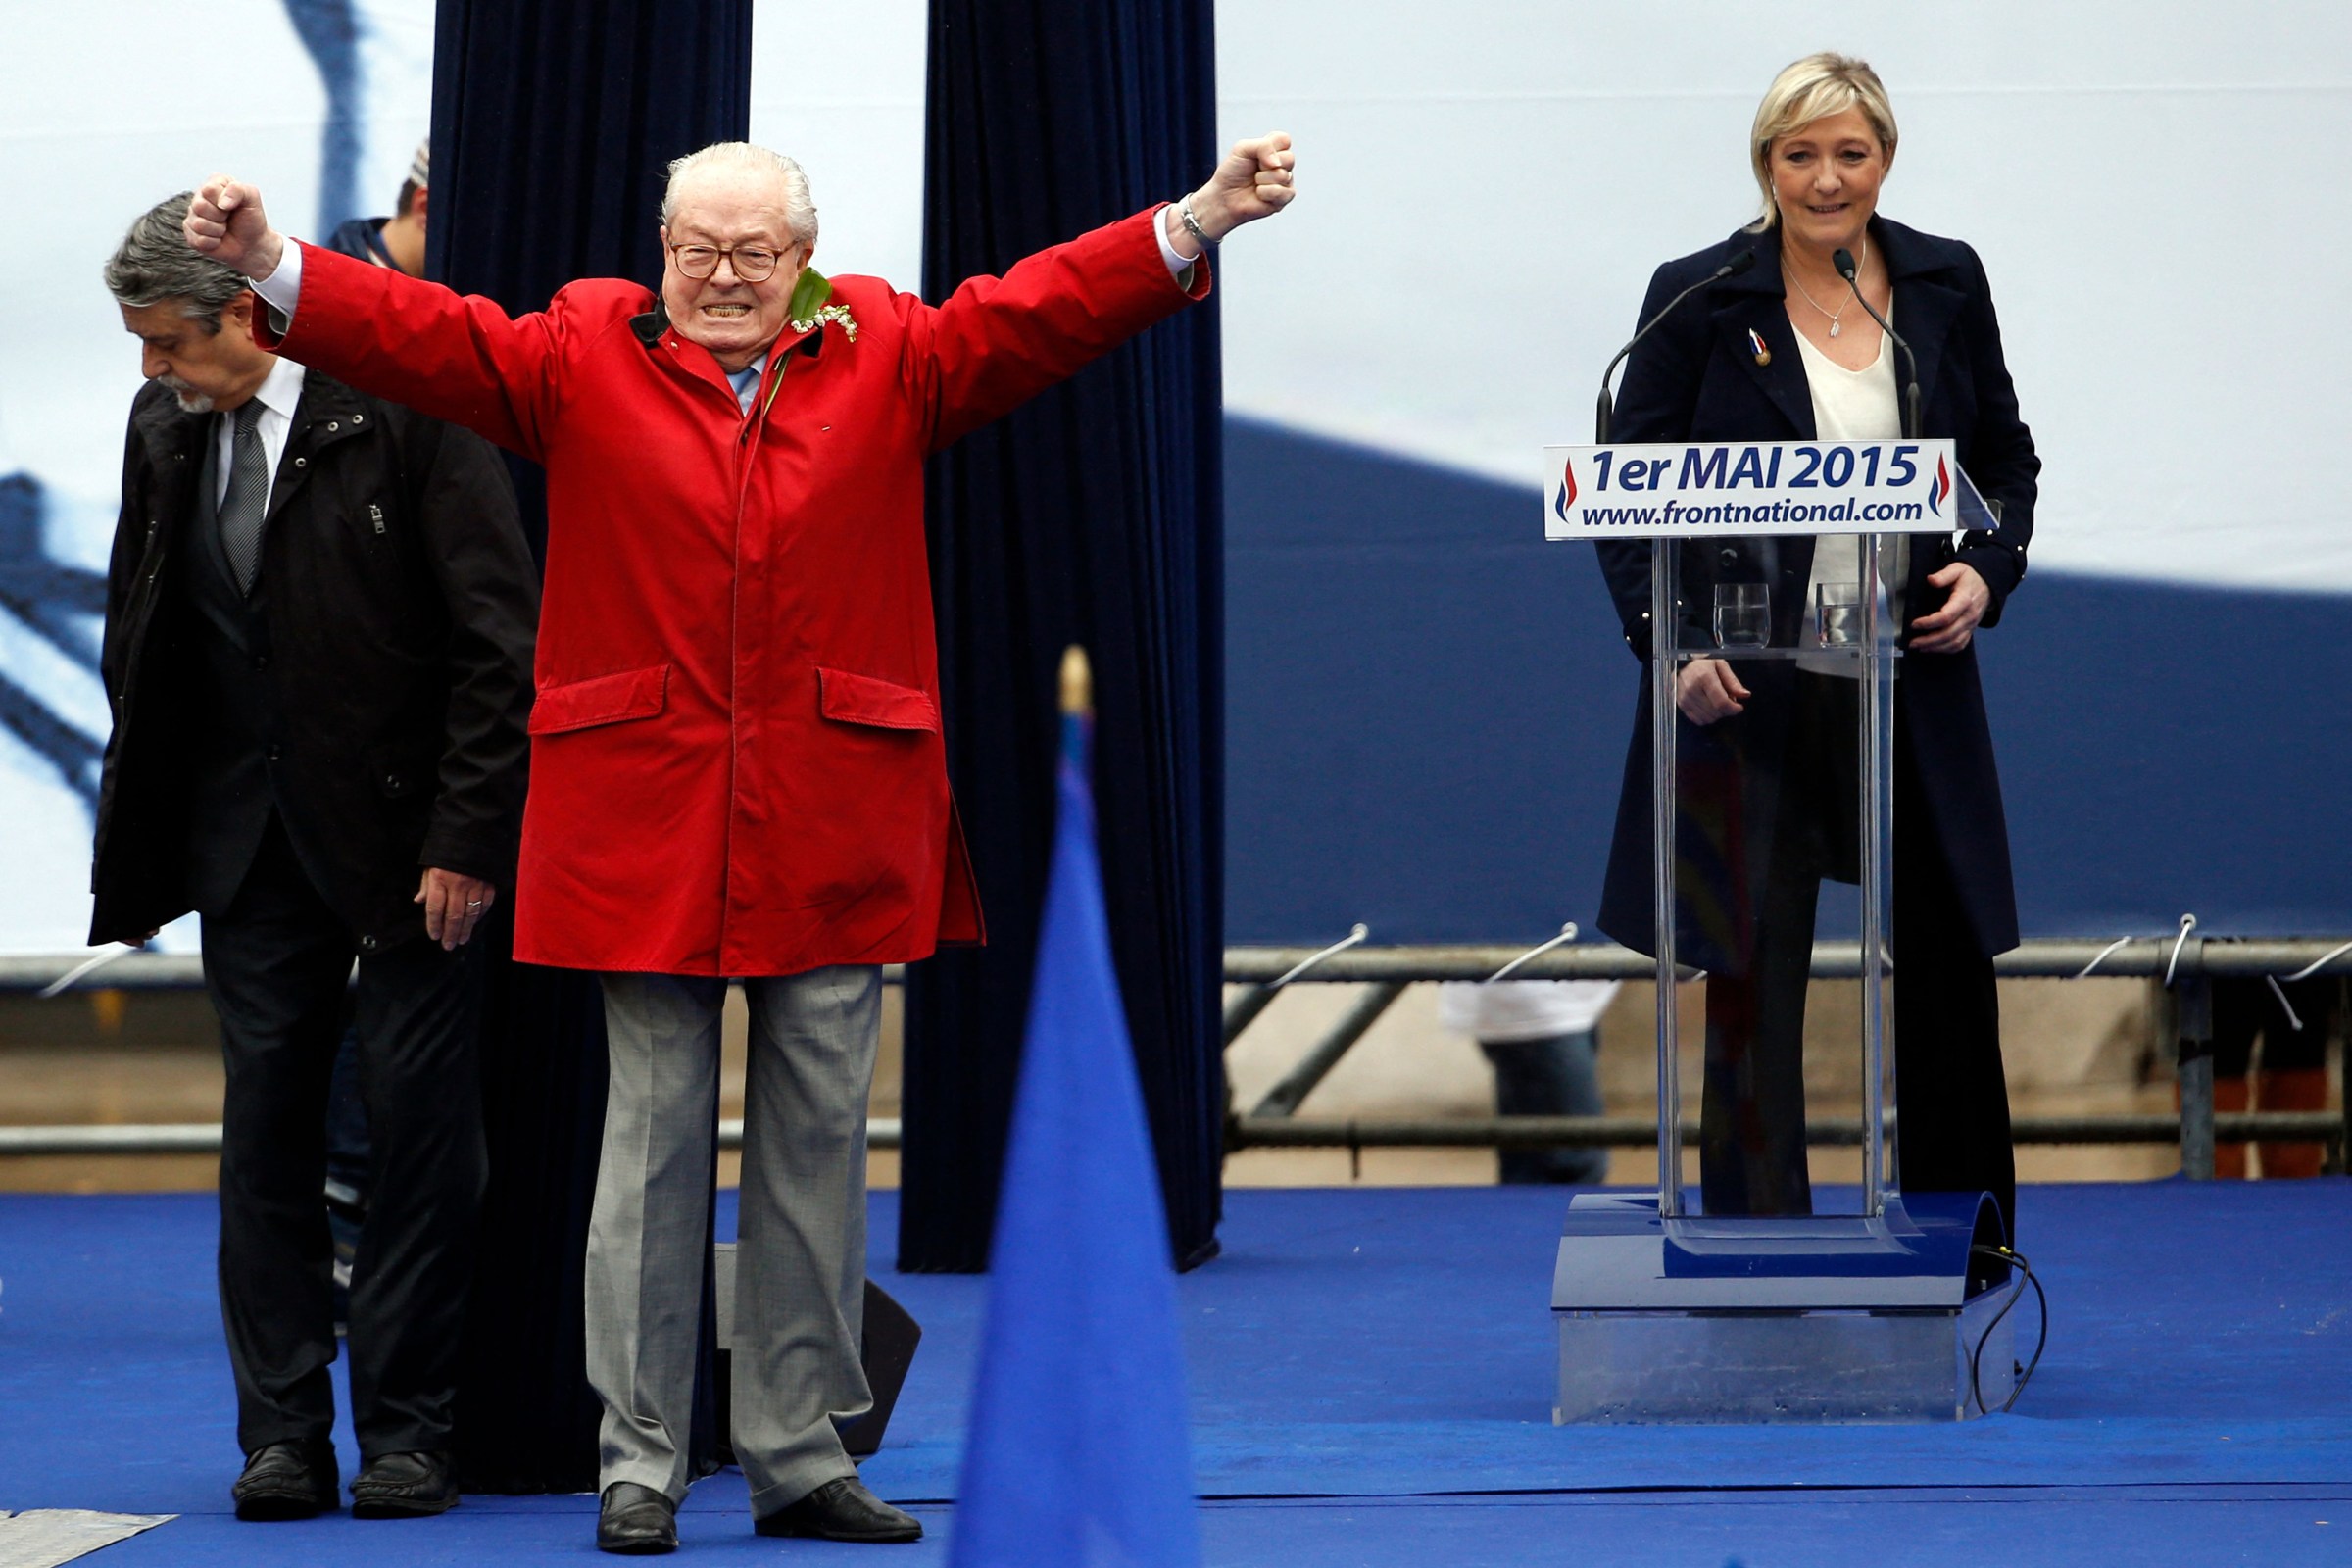 France's far-right political party Front National founder and honorary president Jean-Marie Le Pen gestures onstage as FN's president Marine Le Pen looks on, in Paris France, May 1, 2015.